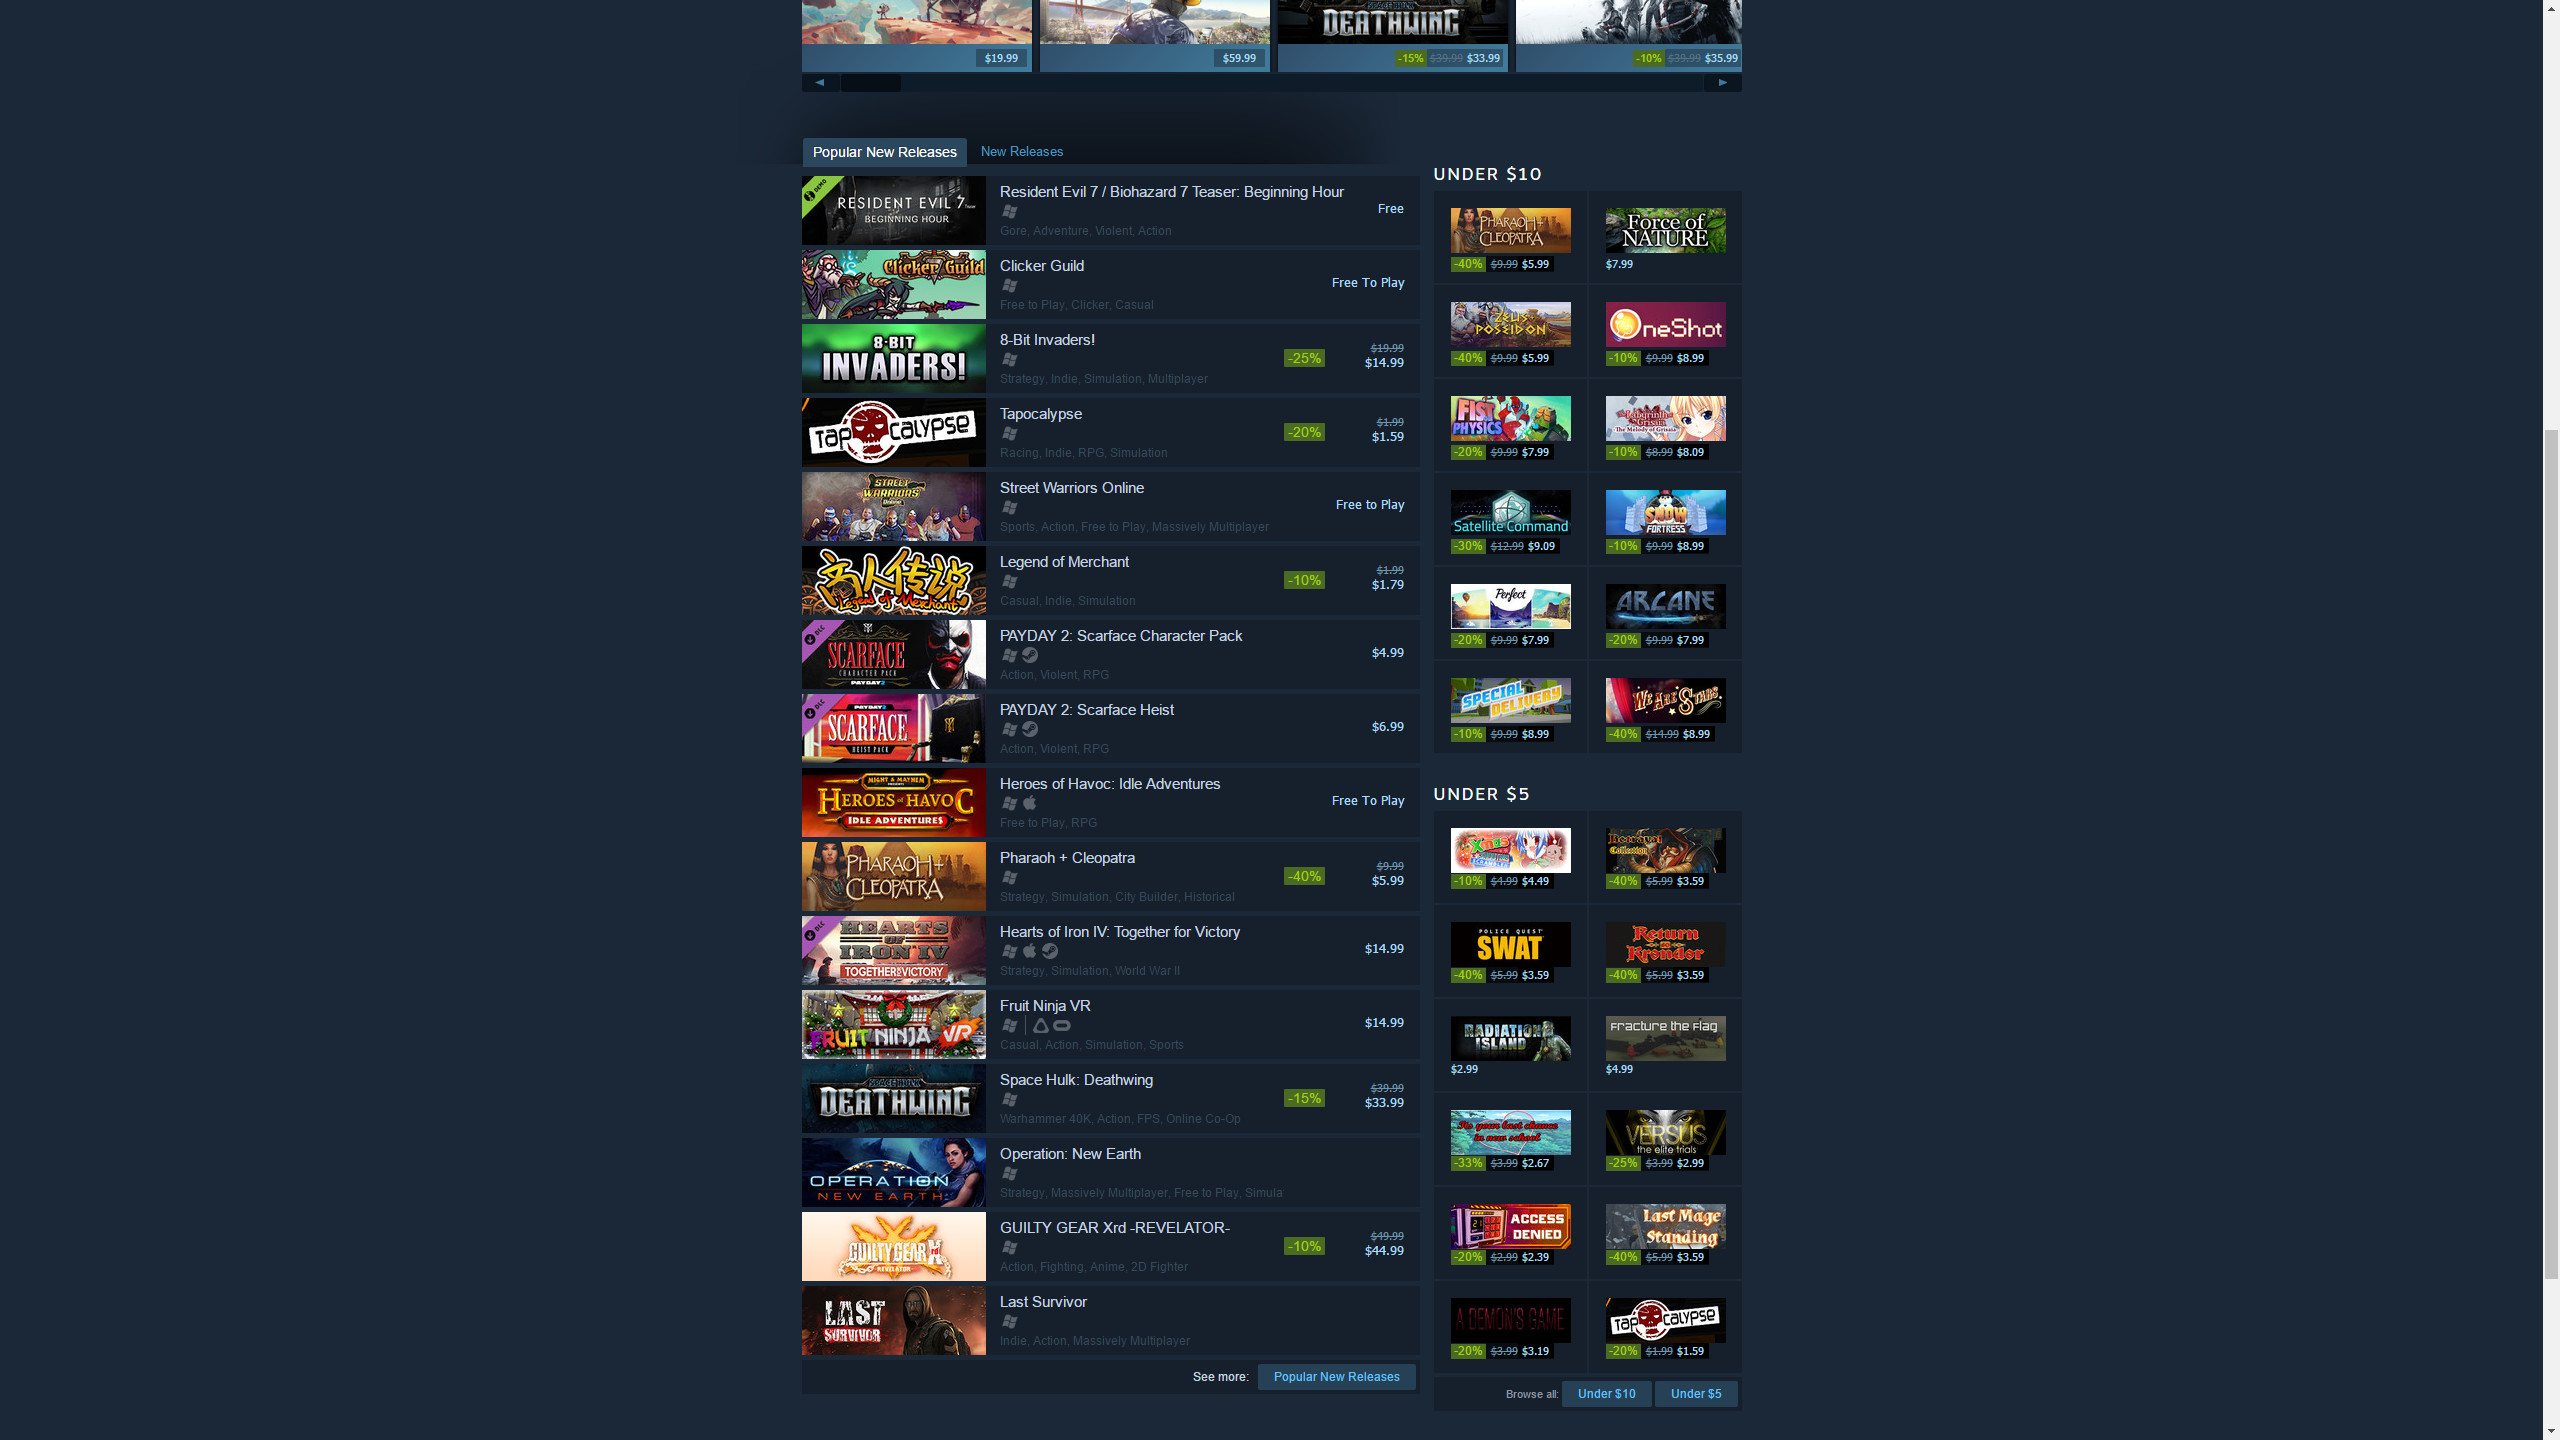 2560x1440 There's Something Really Wrong With Steam, PC Gaming's Biggest Digital Store